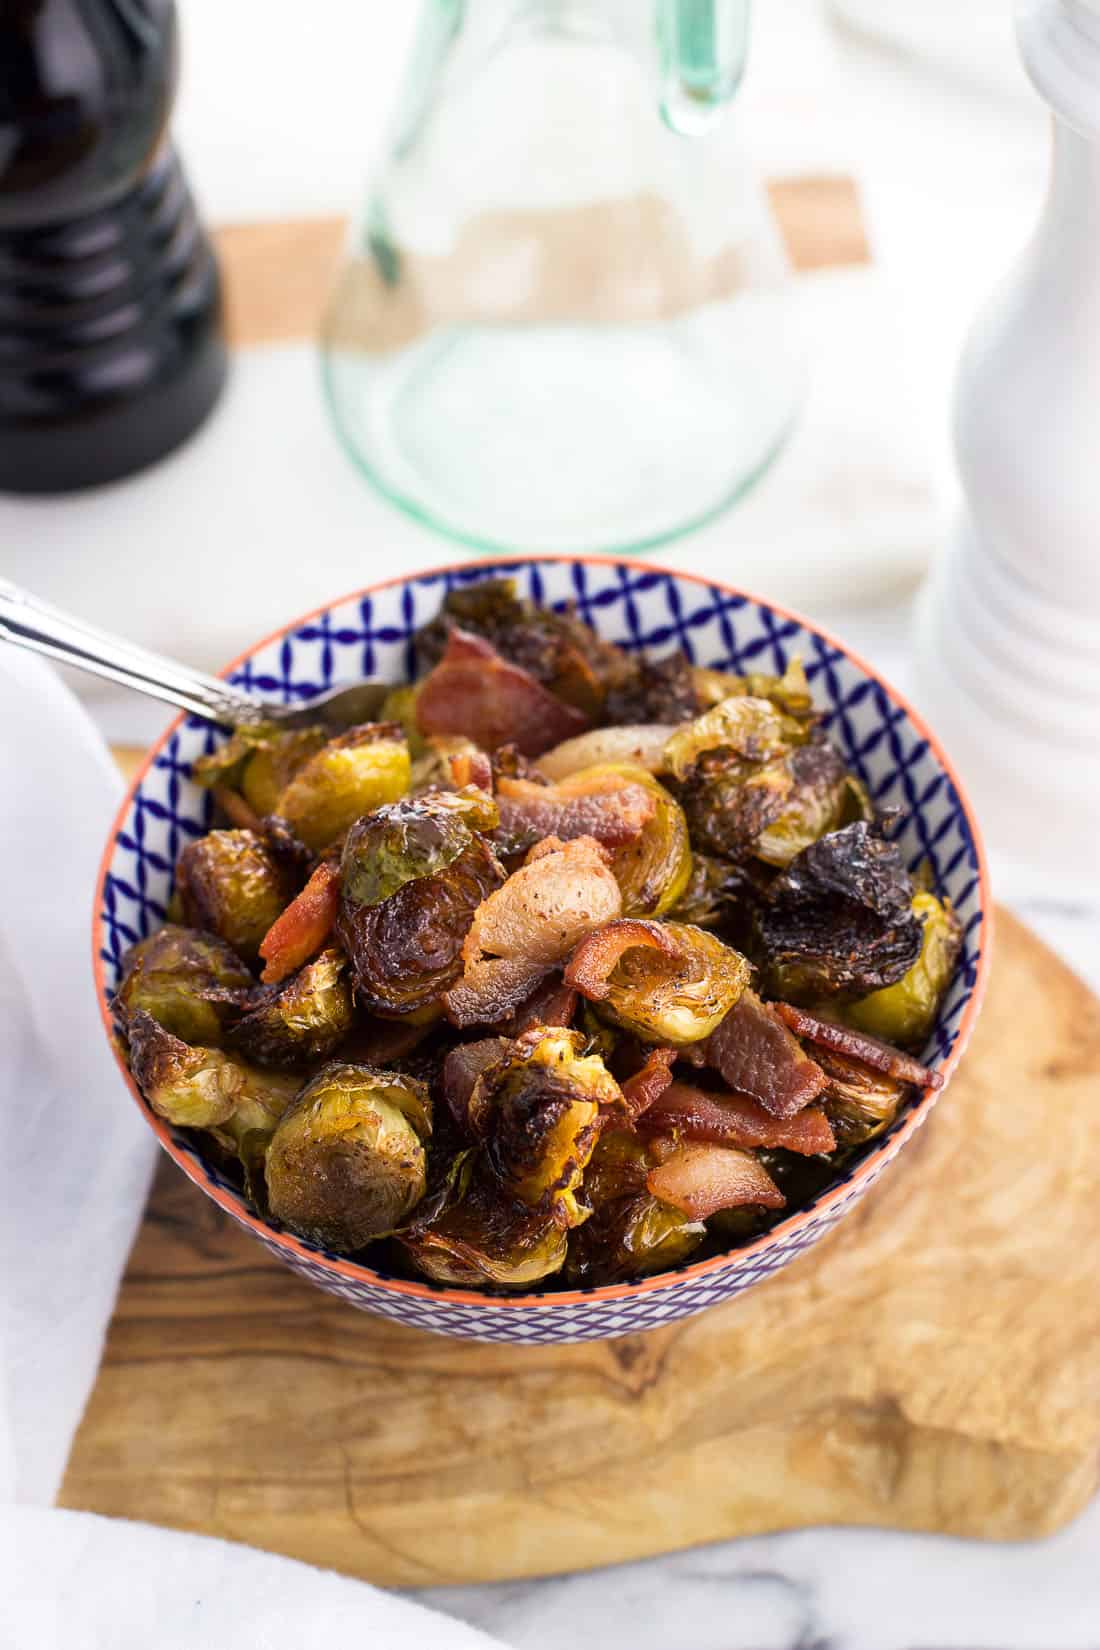 A small ceramic bowl on a wooden serving board filled with roasted brussels sprouts and bacon